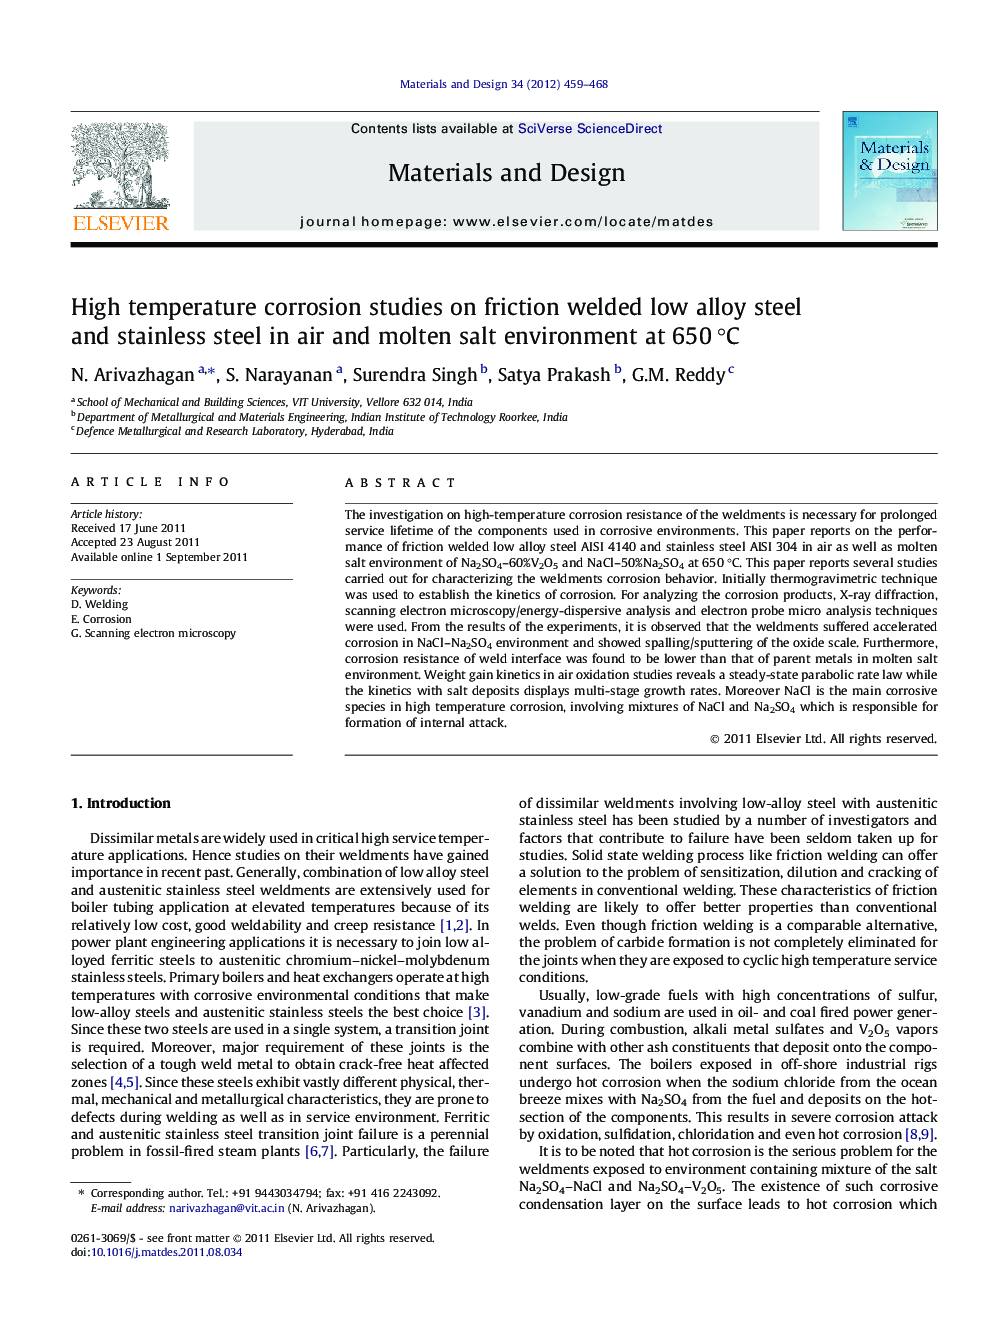 High temperature corrosion studies on friction welded low alloy steel and stainless steel in air and molten salt environment at 650 °C